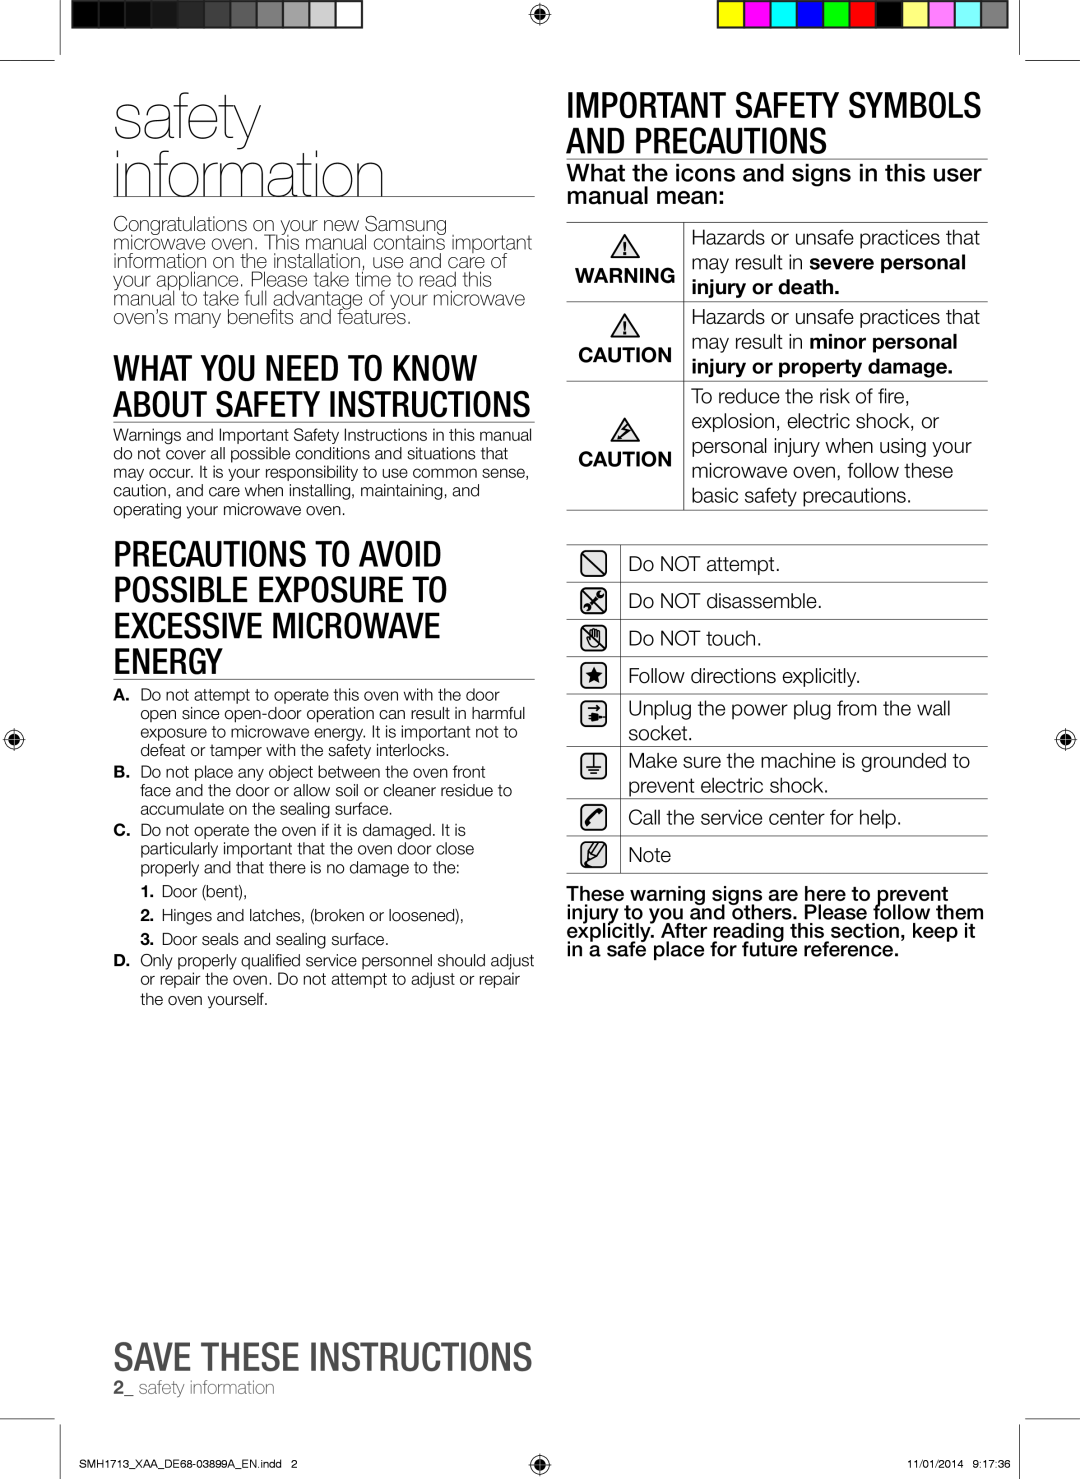 Samsung SMH1713 user manual safety information, Save these instructions, What you need to know about safety instructions 